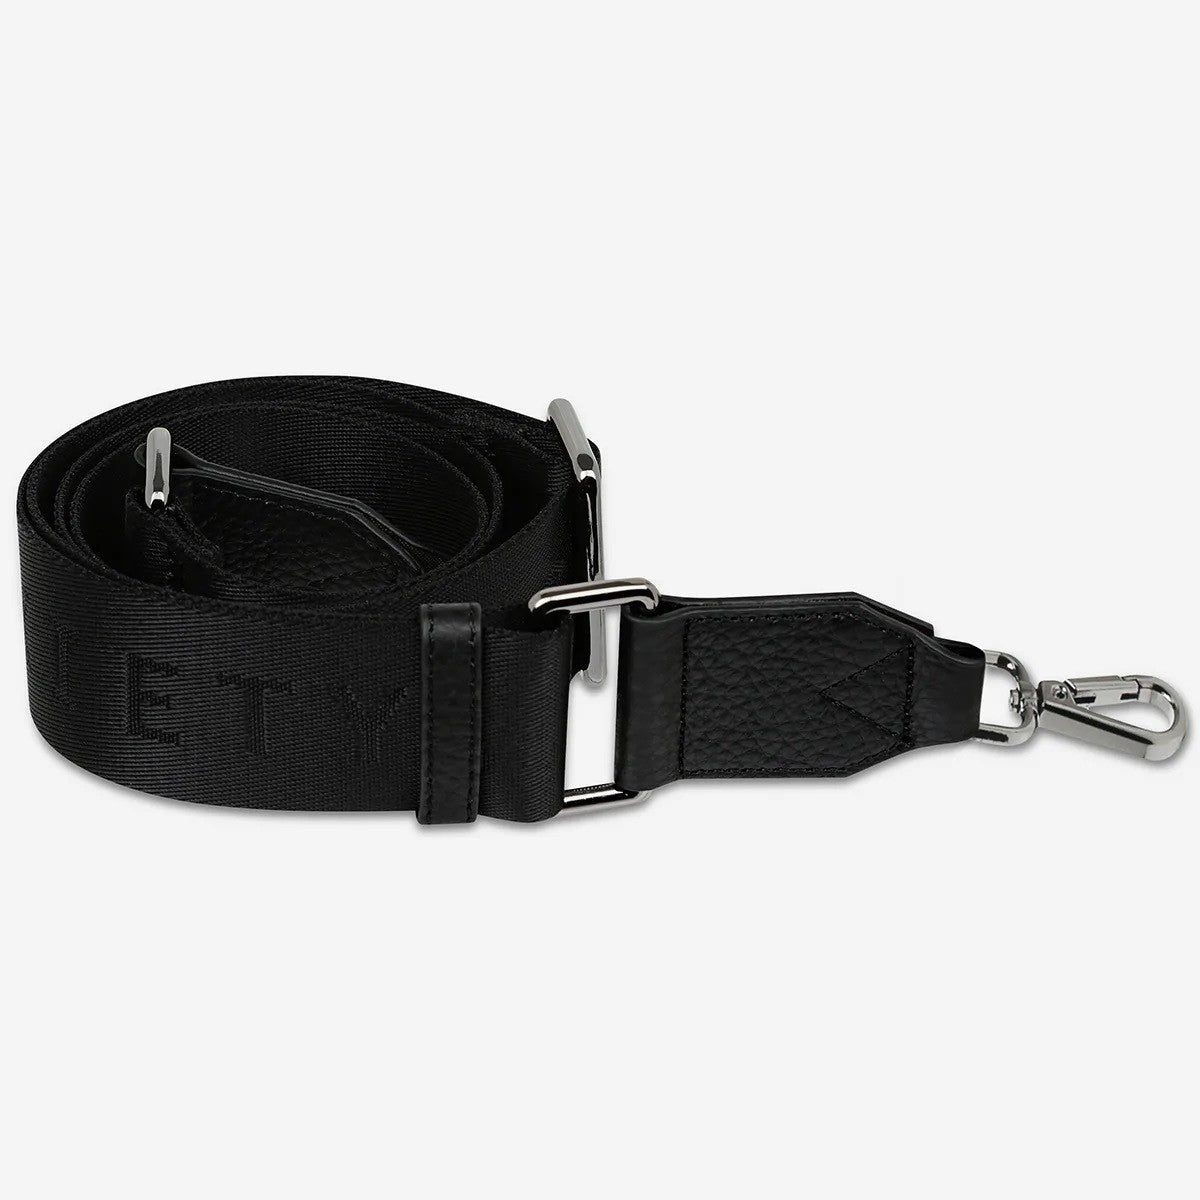 Status Anxiety Without You Strap [COLOUR:Black]